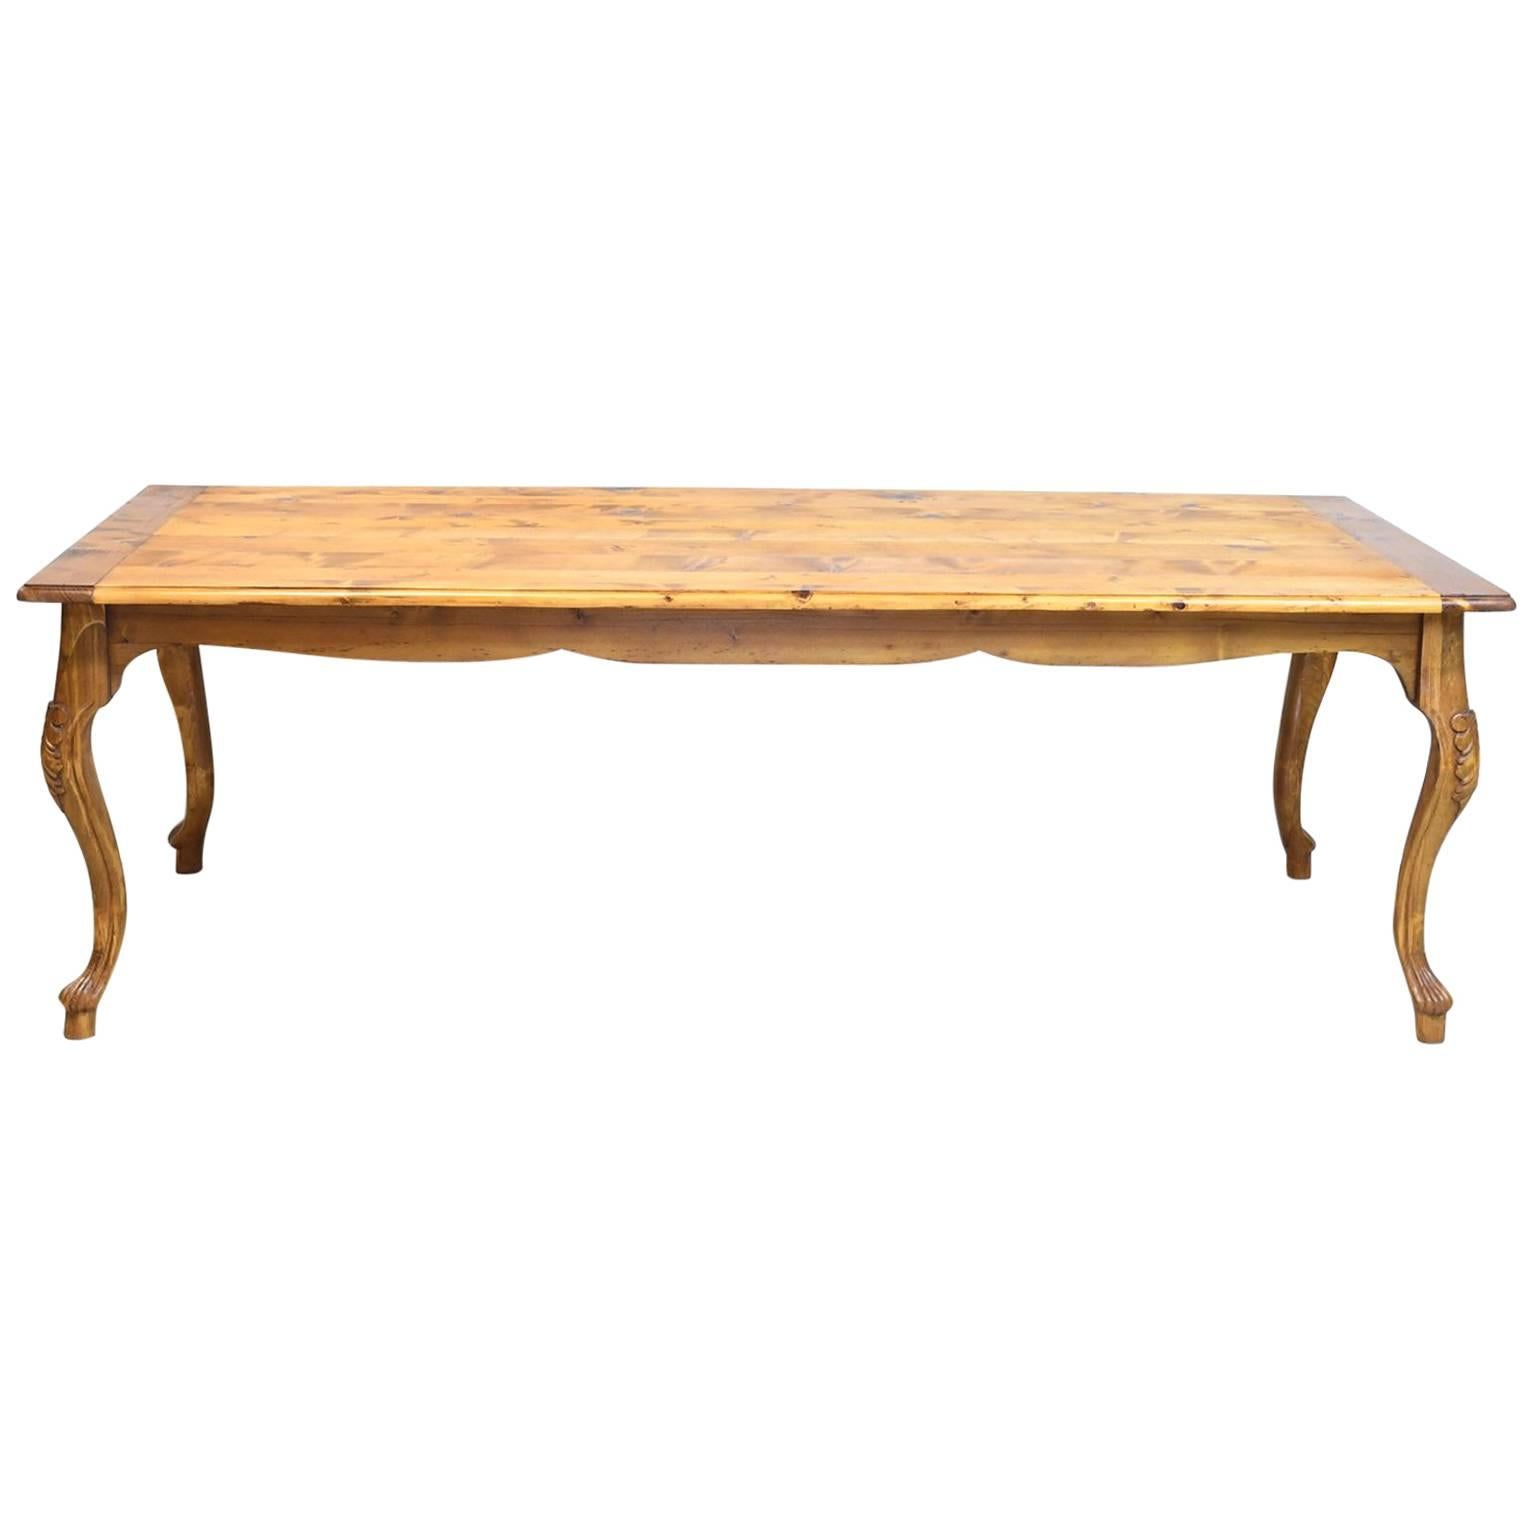 French Provincial Style Long Pine Farmhouse Dining Table, circa 1990s